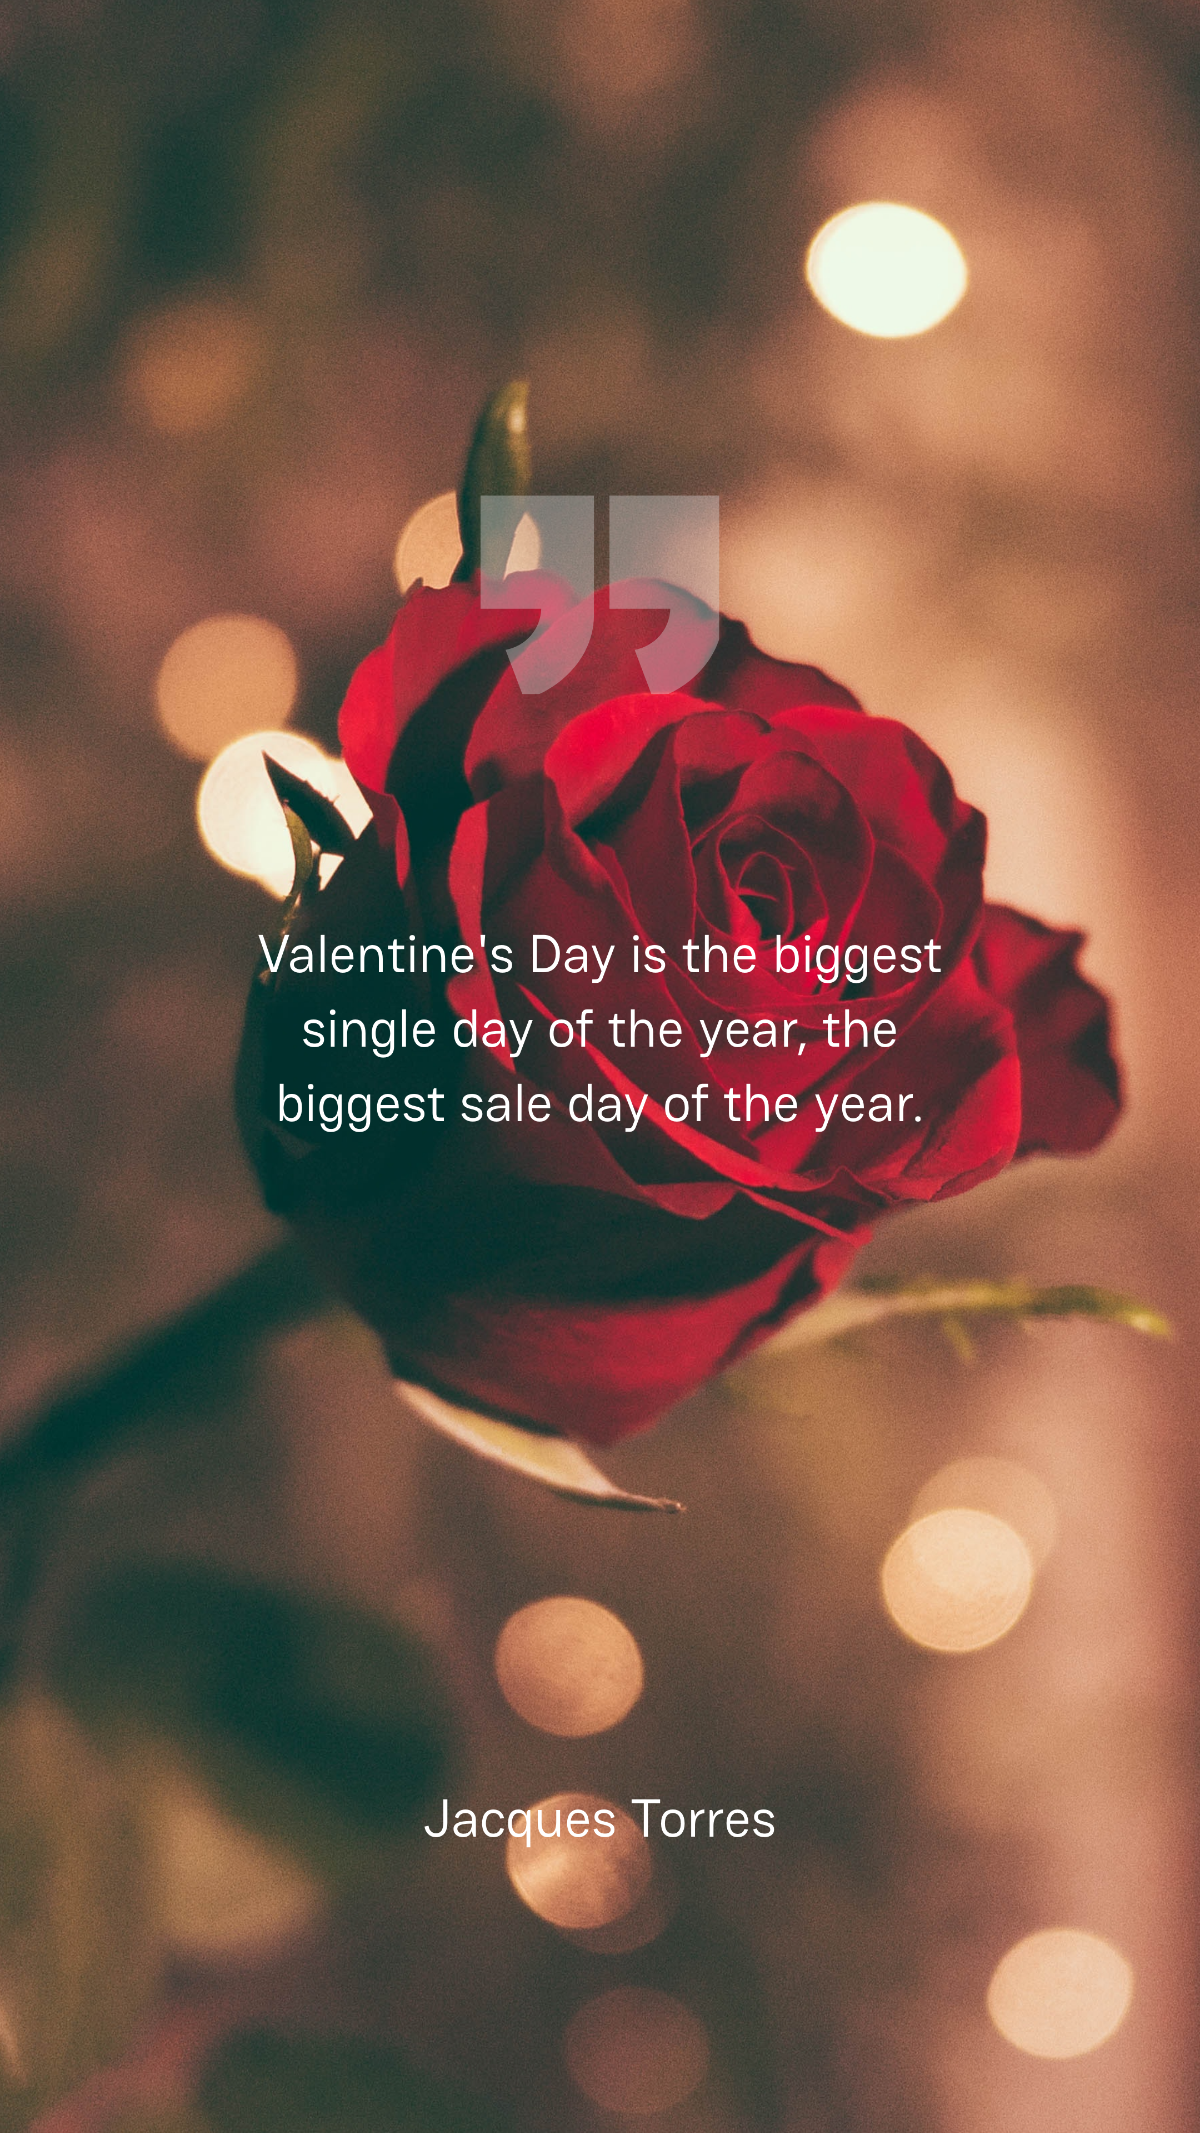 Jacques Torres - Valentine's Day is the biggest single day of the year, the biggest sale day of the year. Template